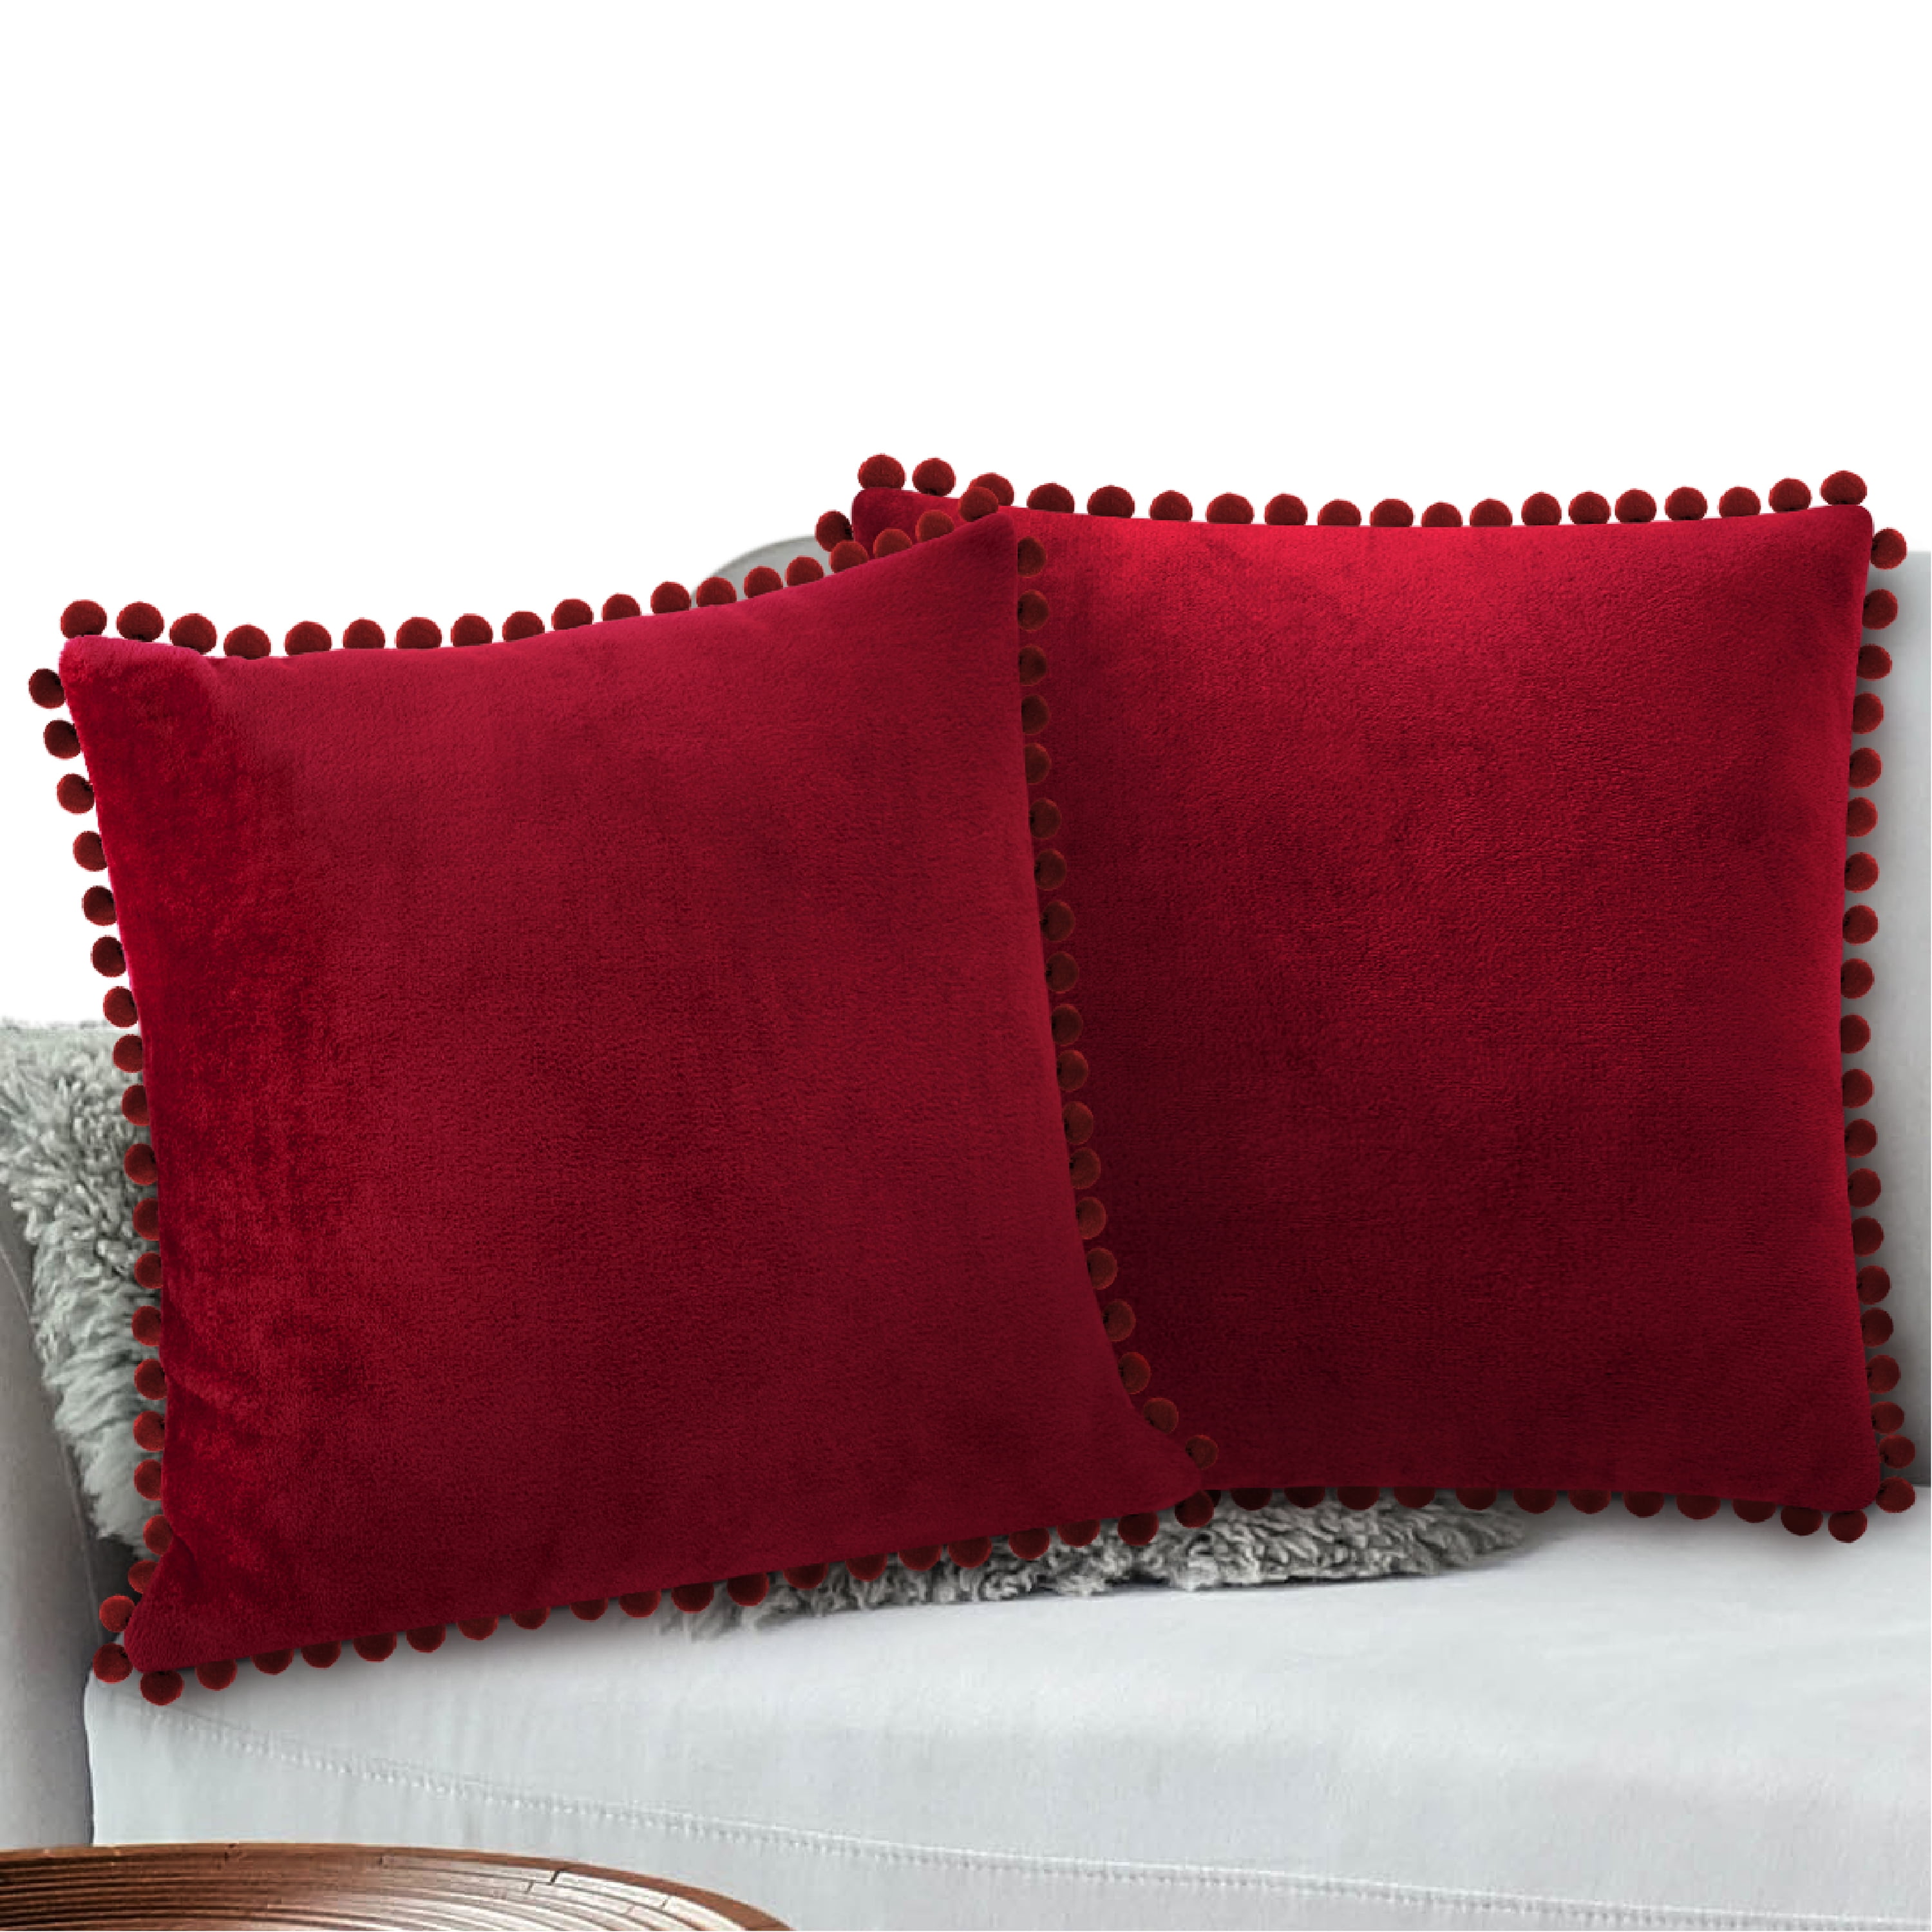 Fleece Velvet Plush Soft Decor Accent Zipper Euro Cushion Cover Set of 2 Solid Wine Red PAVILIA Decorative Throw Pillow Covers Square Pillow Case for Sofa Couch Bed Bedroom Living Room 20x20 